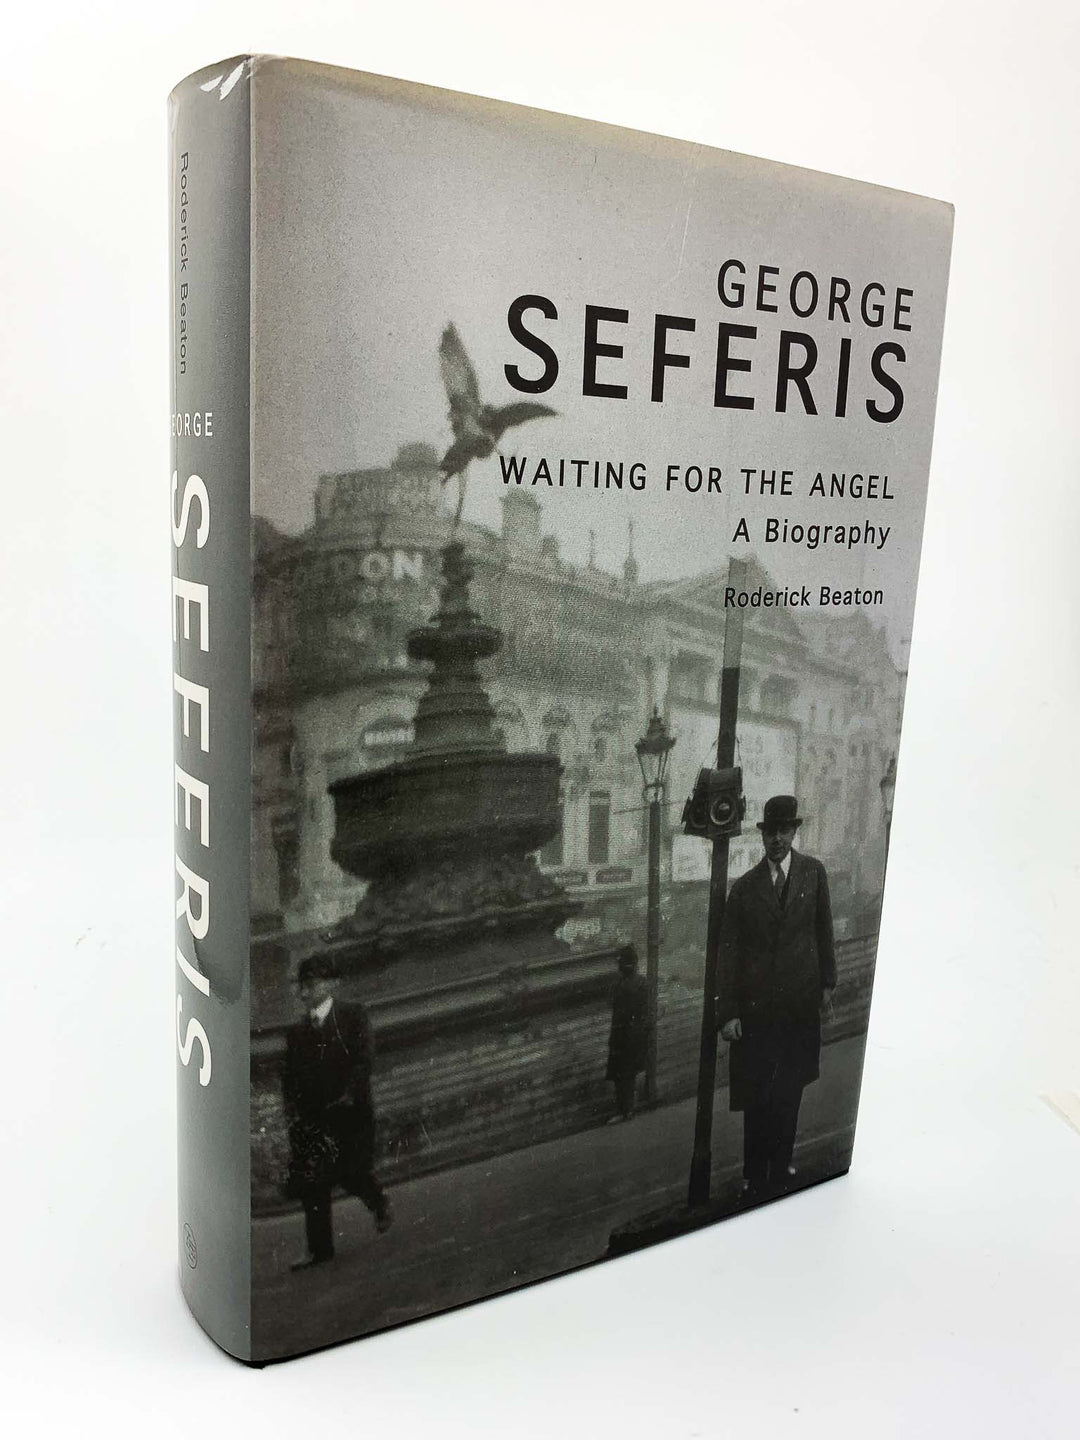 Beaton, Roderick - George Seferis : Waiting for the Angel - A Biography | front cover